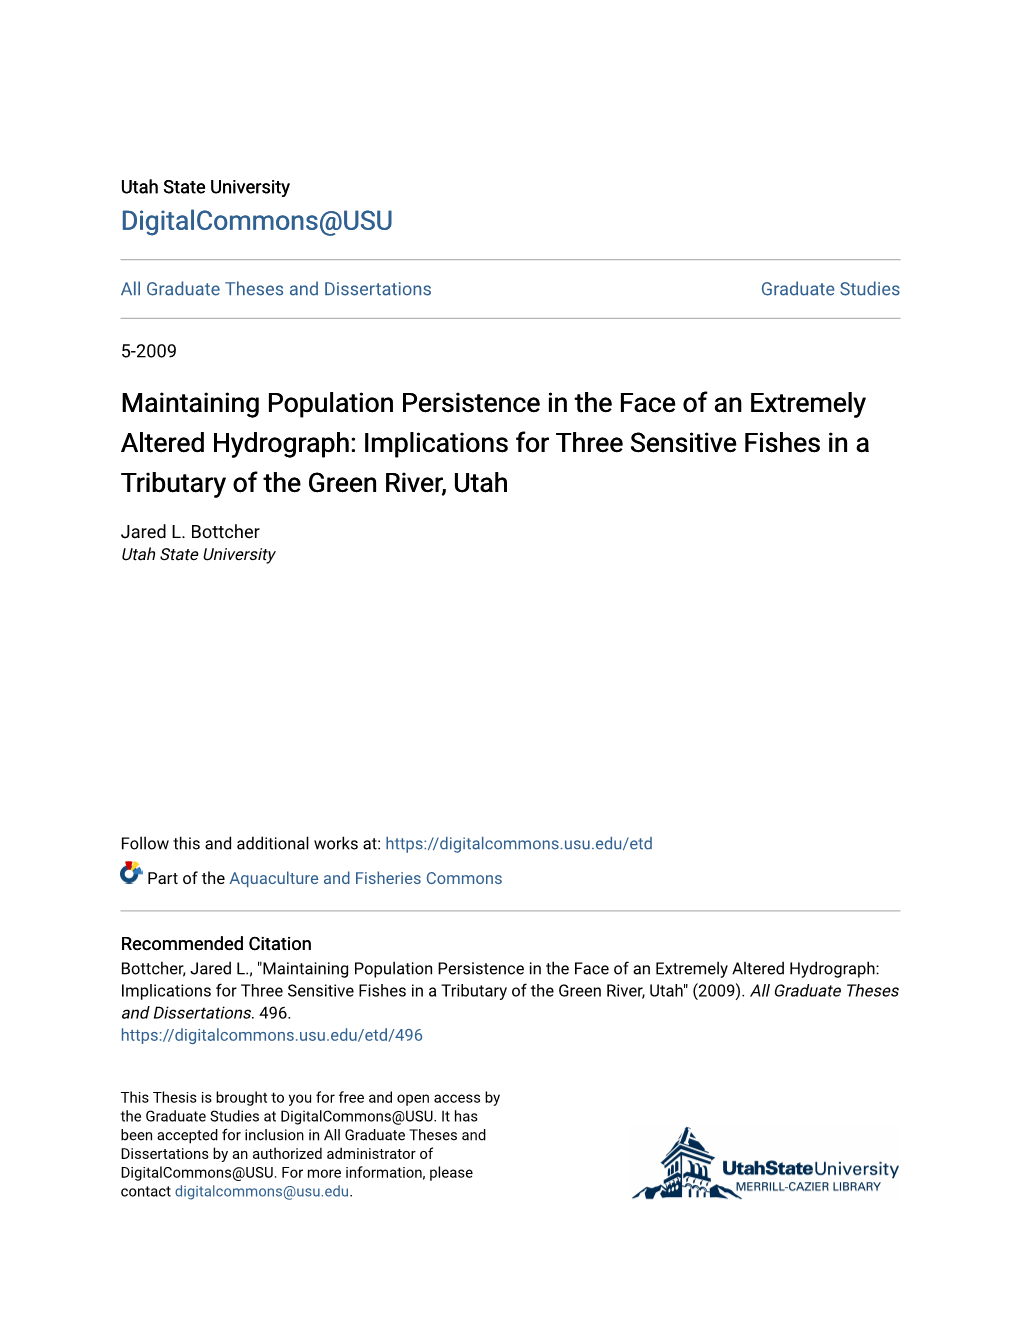 Implications for Three Sensitive Fishes in a Tributary of the Green River, Utah